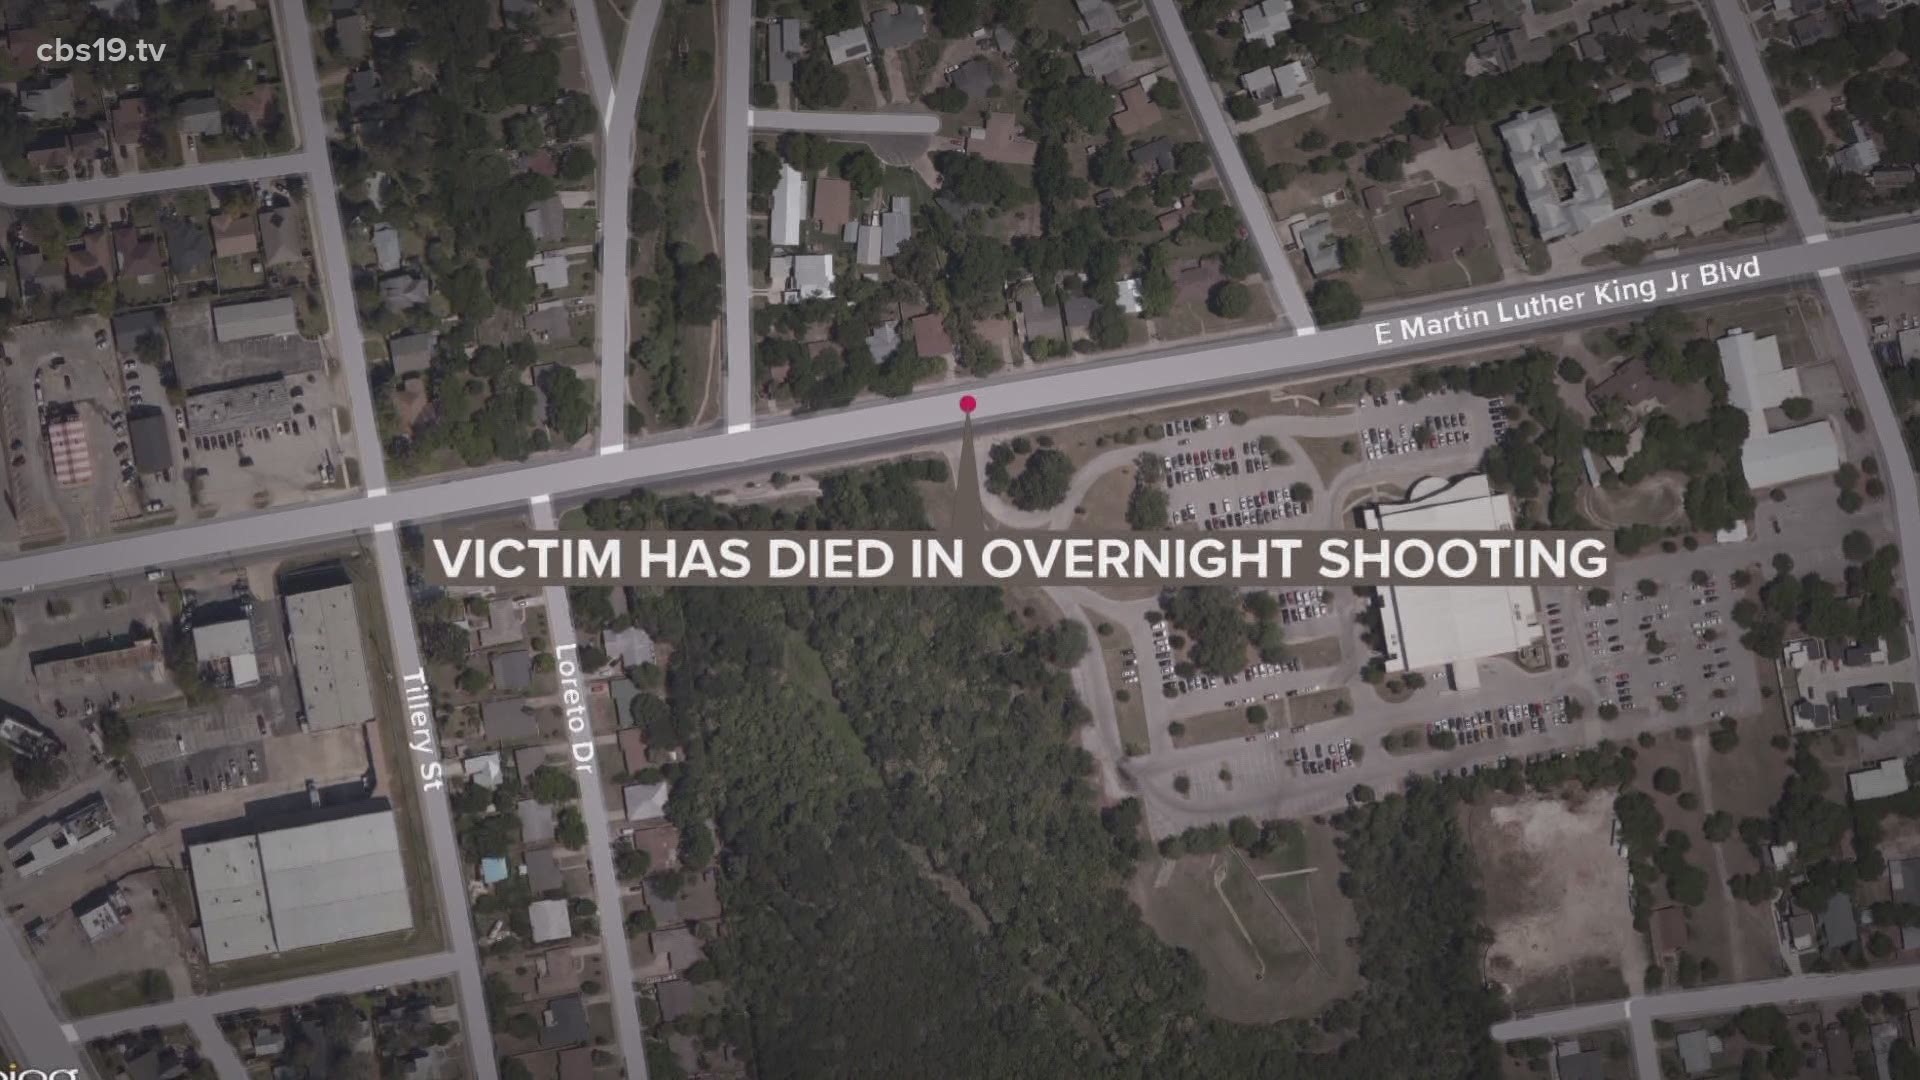 One of two victims from Monday night's shooting in Palestine has died.